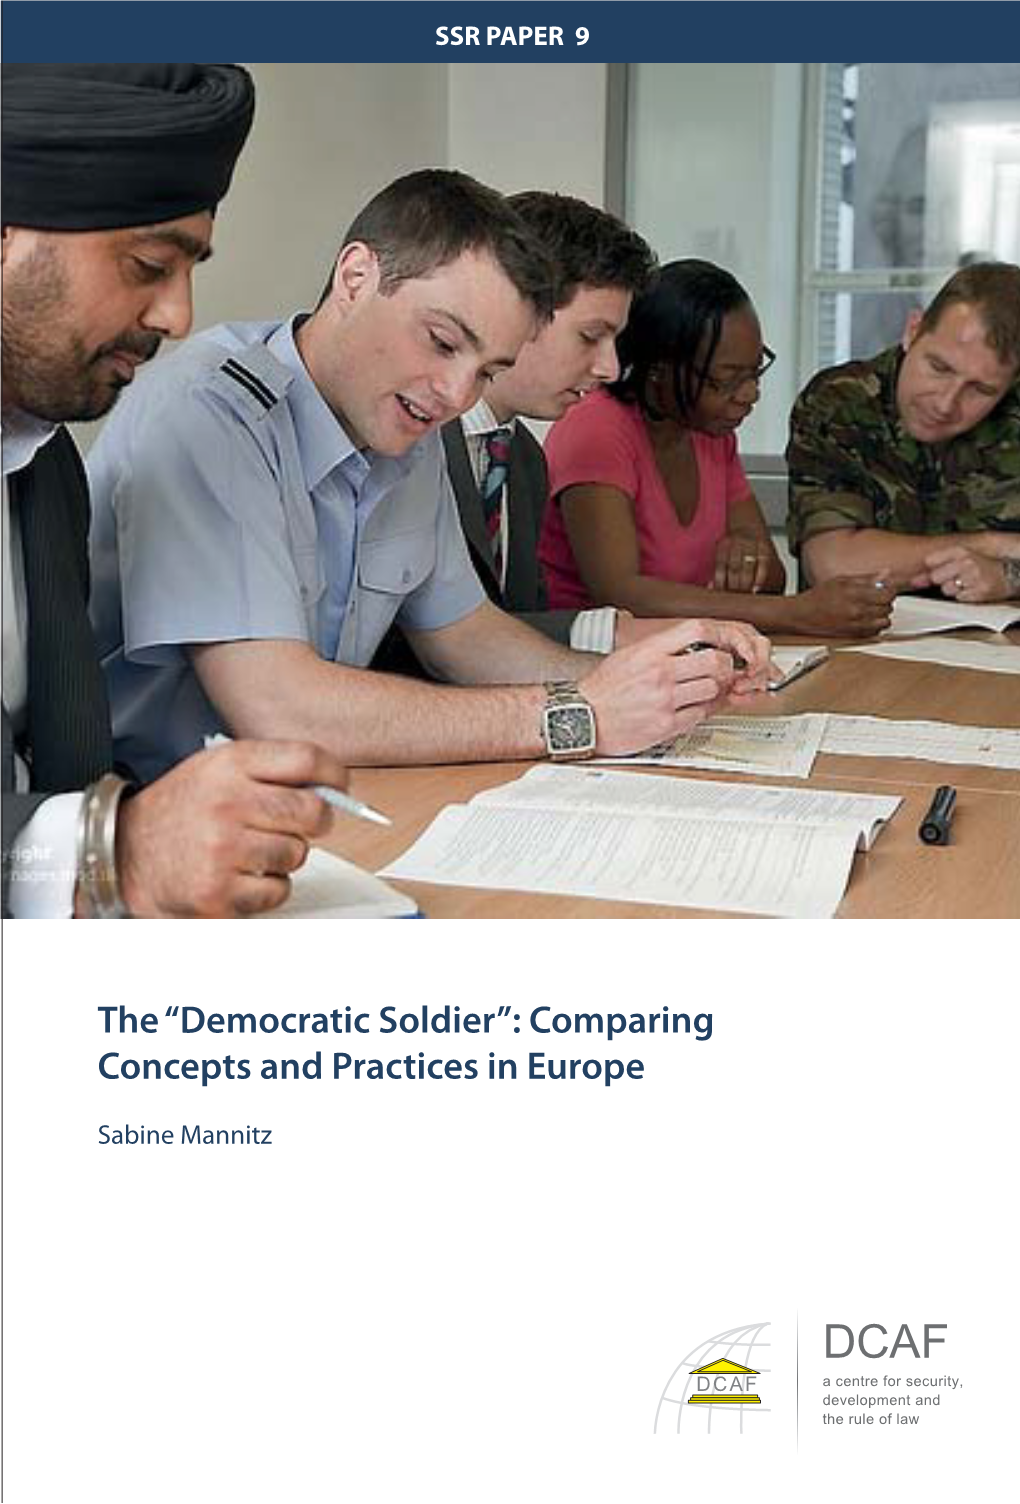 Democratic Soldier”: Comparing Concepts and Practices in Europe